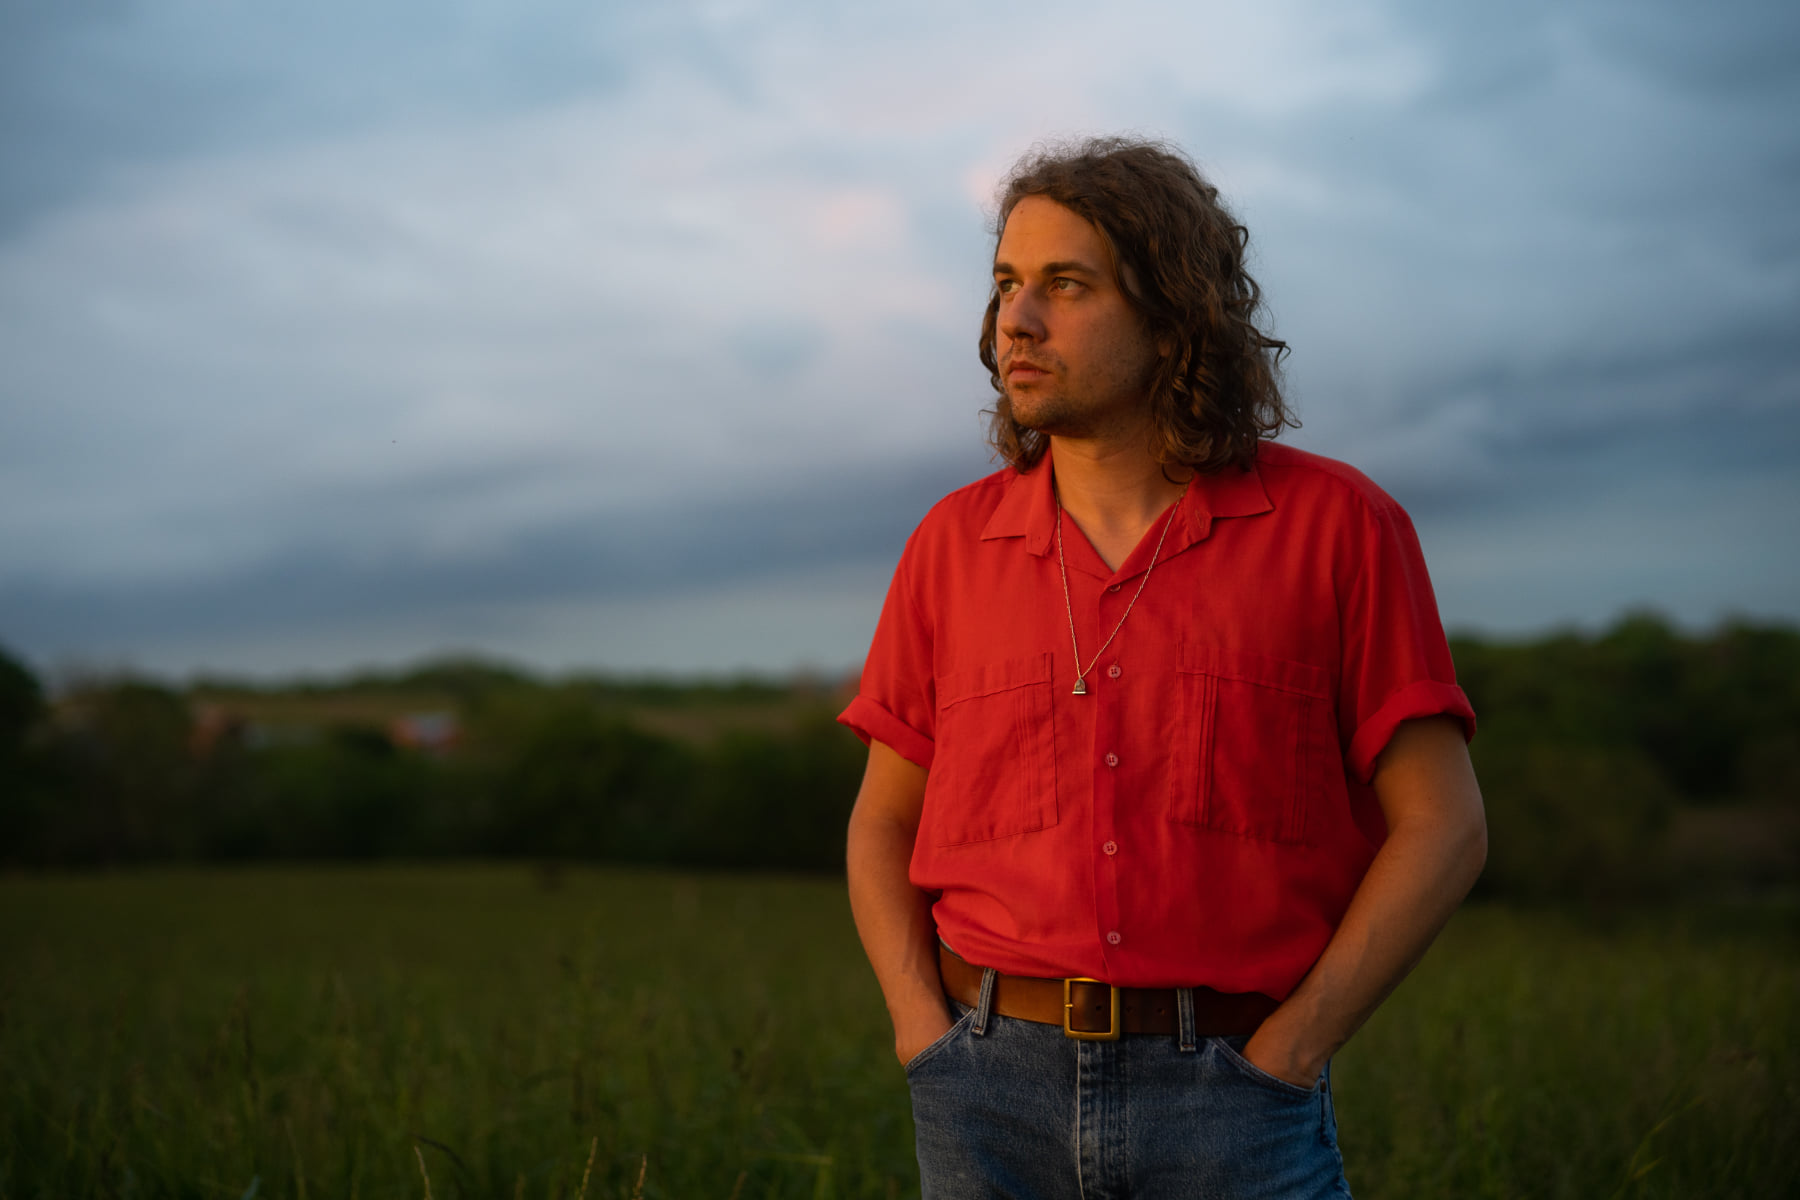 Kevin Morby ‘Sundowner’ Finds Itself At Crossroads of Relevant, Reflective